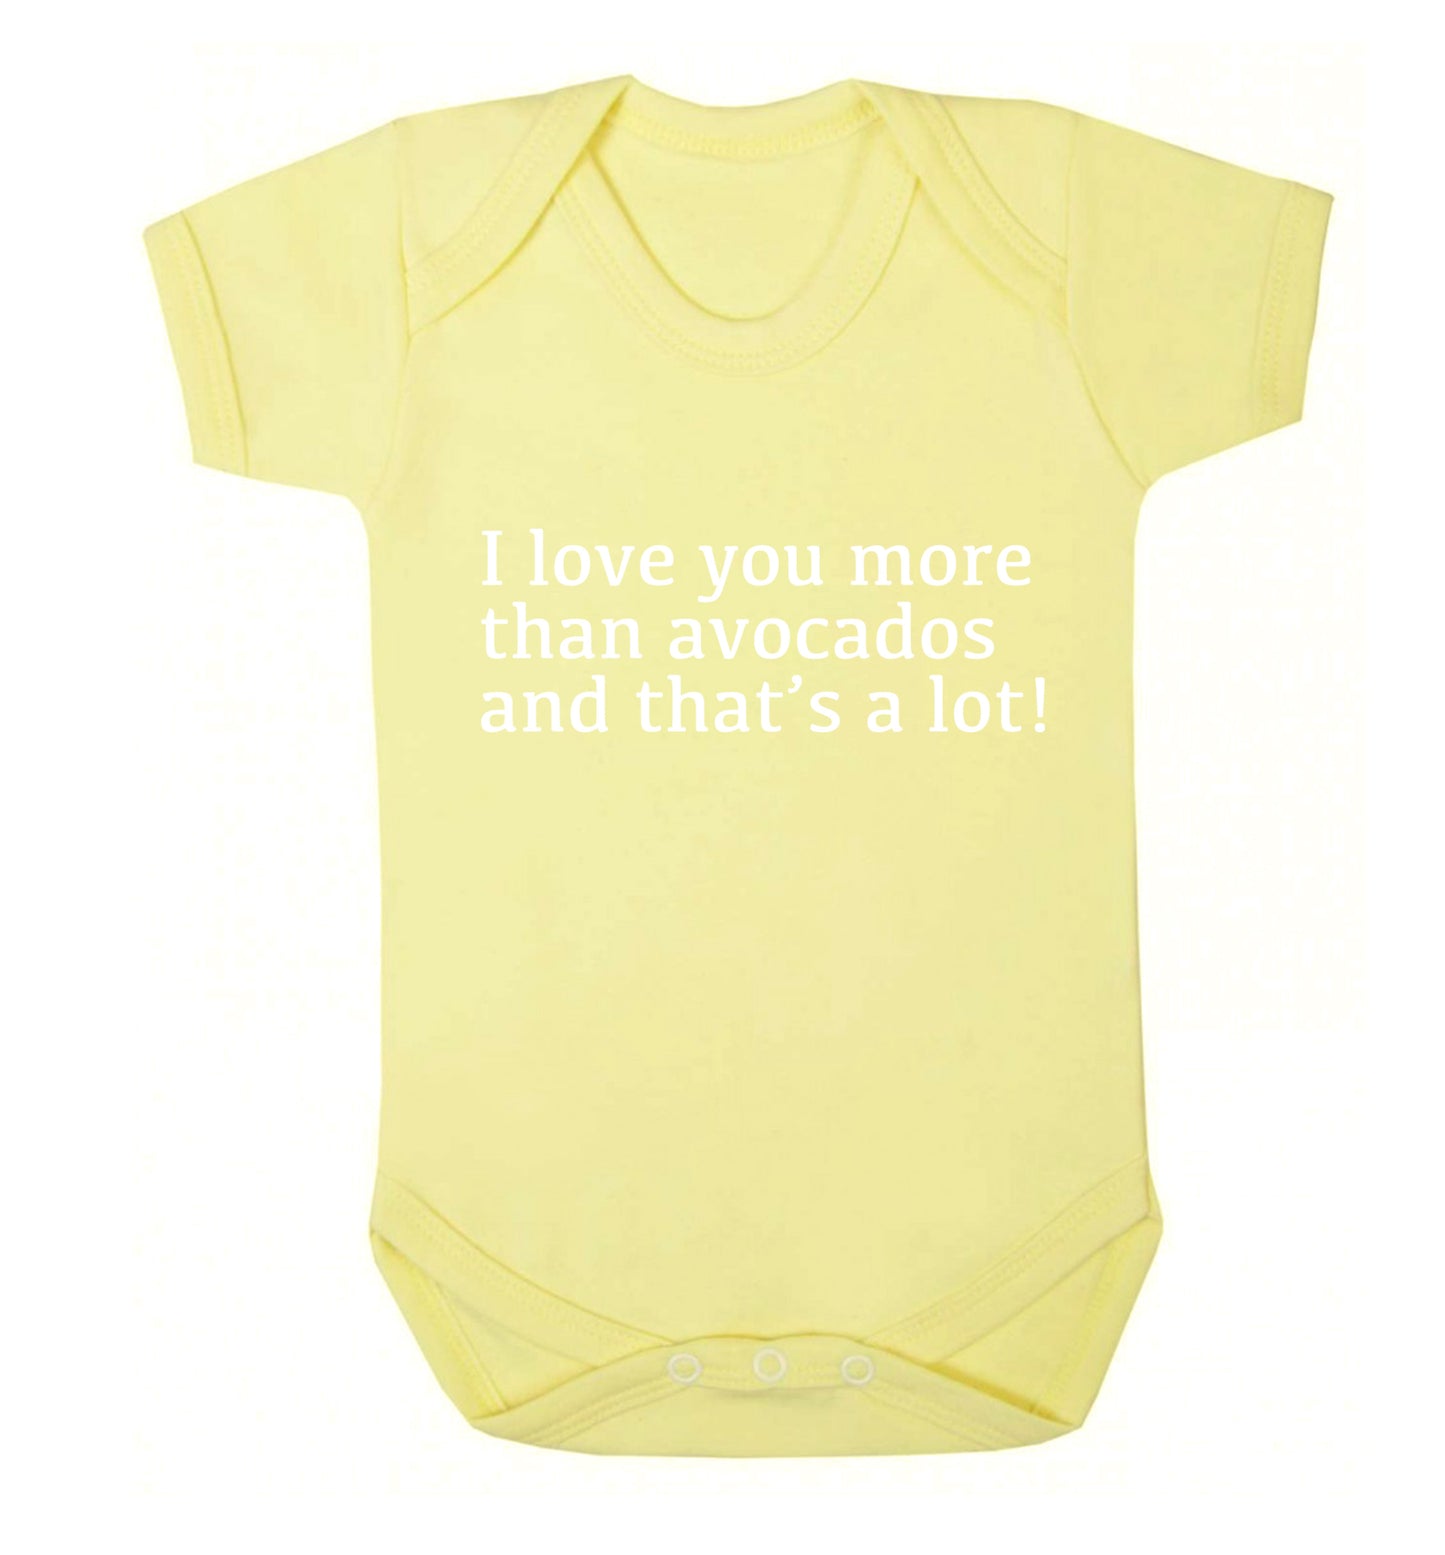 I love you more than avocados and that's a lot Baby Vest pale yellow 18-24 months